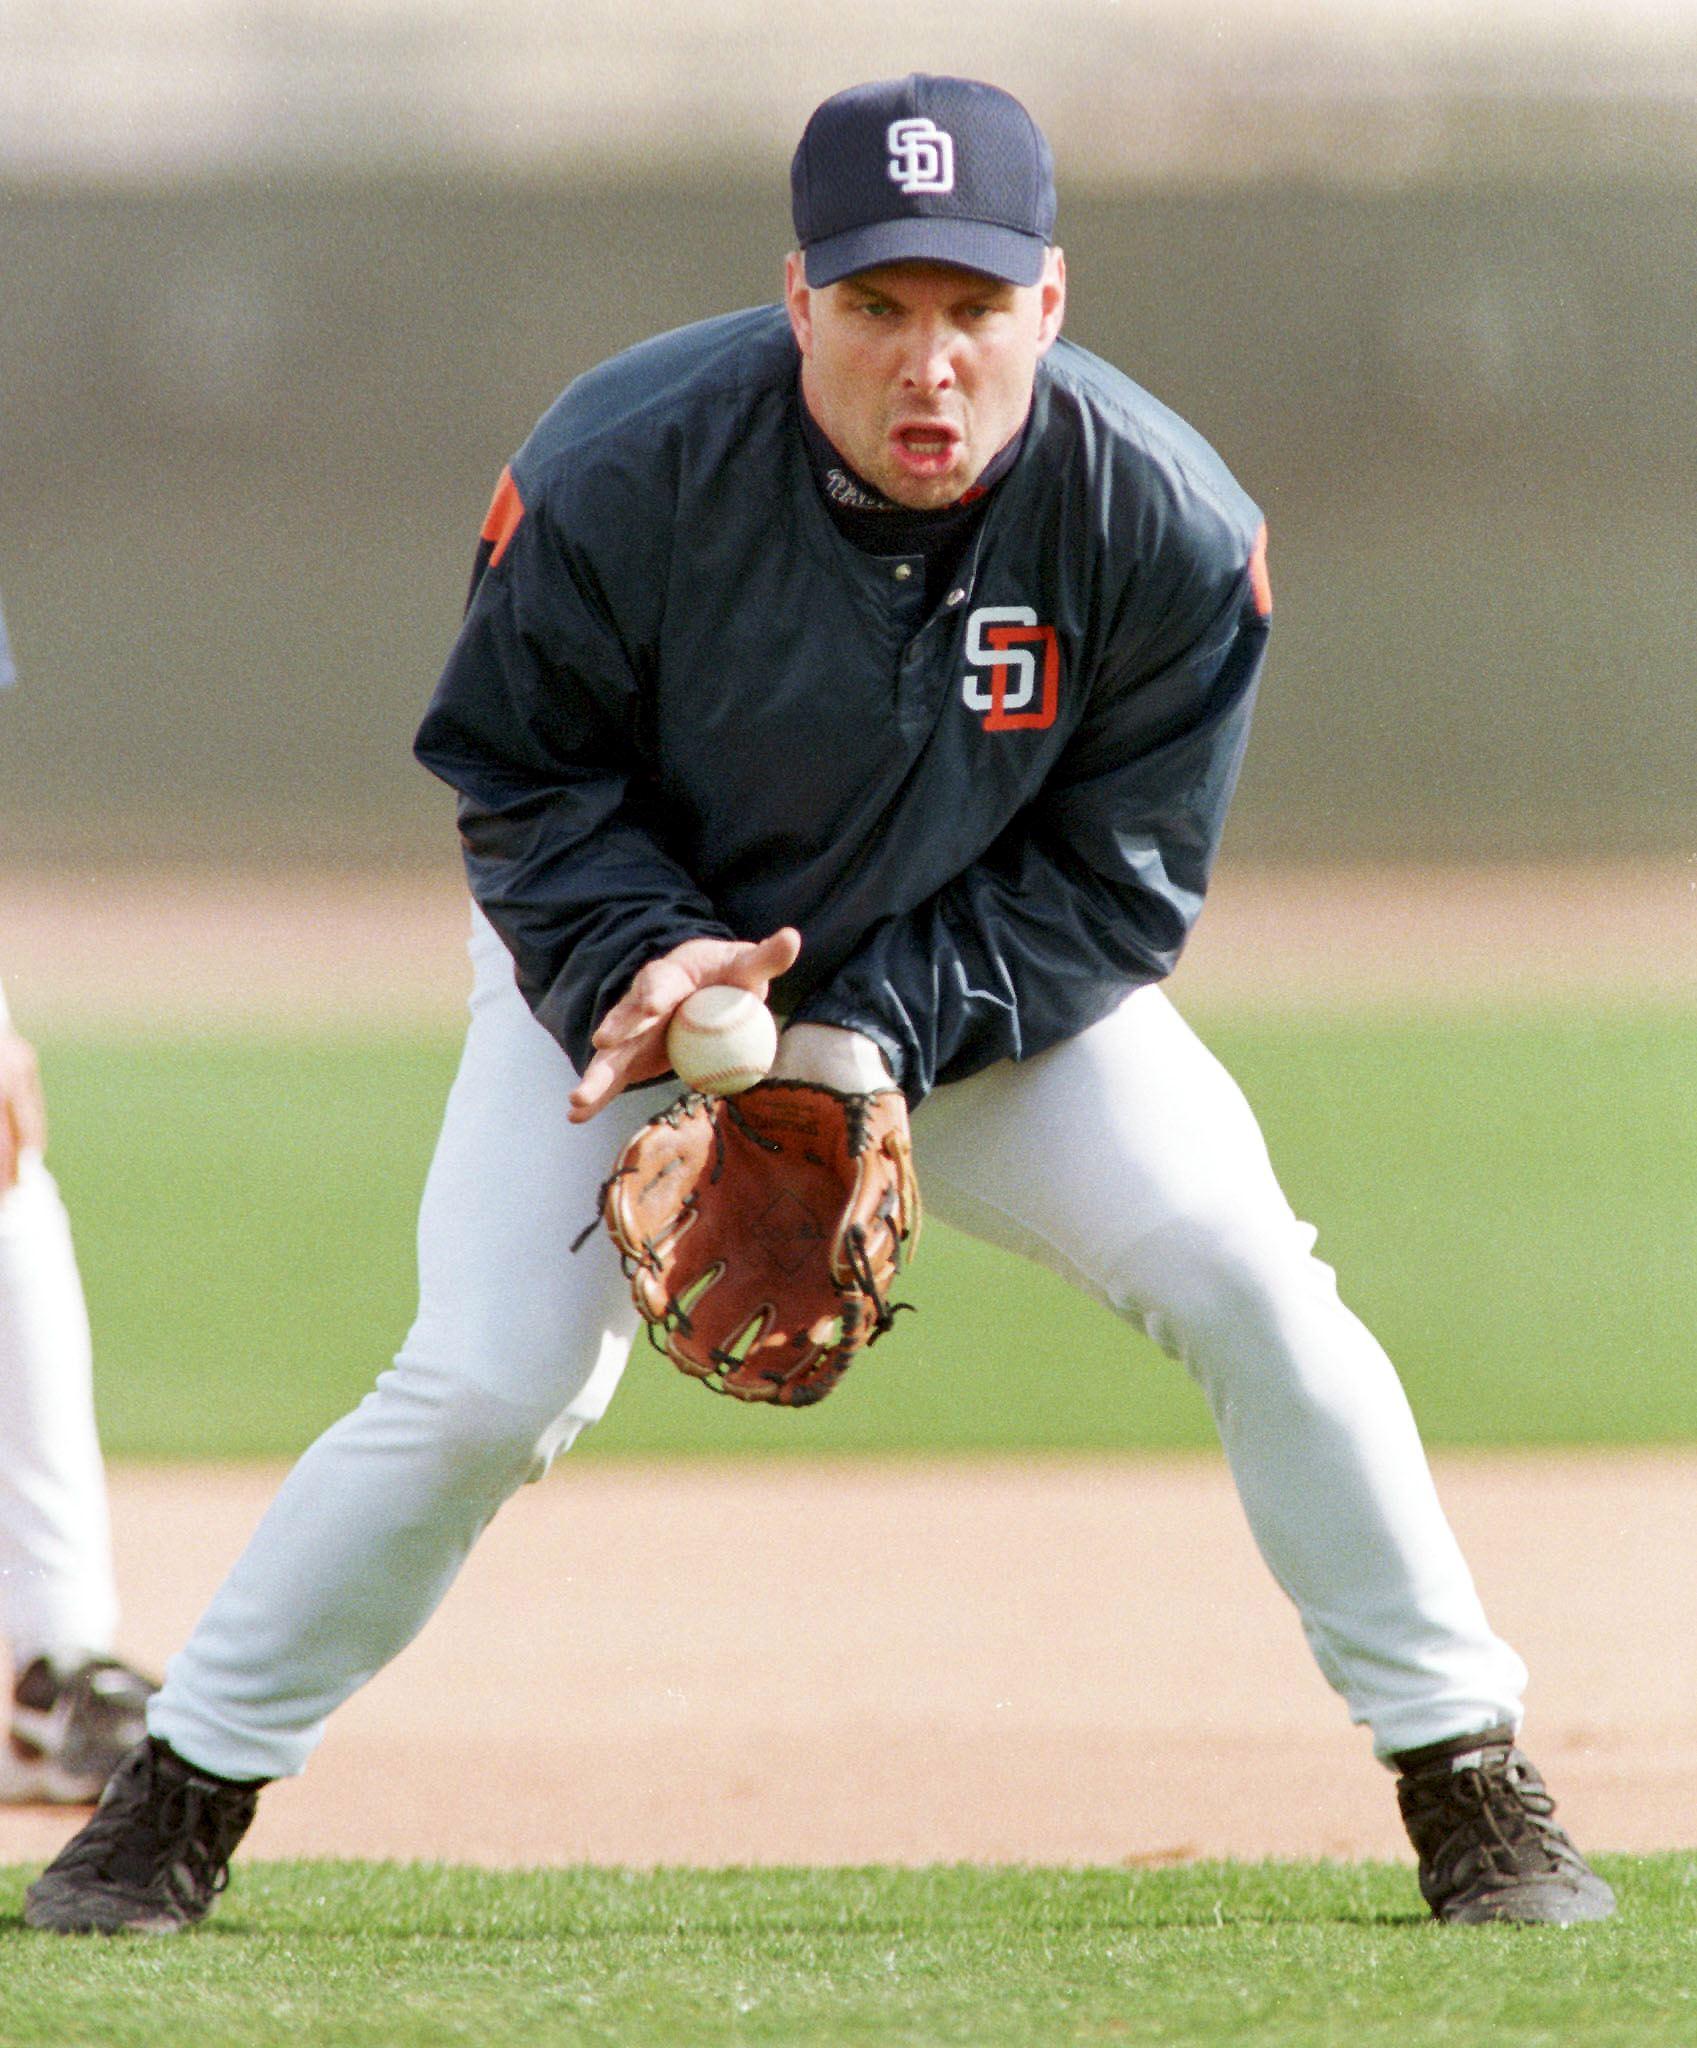 Garth Brooks during spring training with the San Diego Padres on February 19, 1999 in Peoria, Arizona | Source: Getty Images